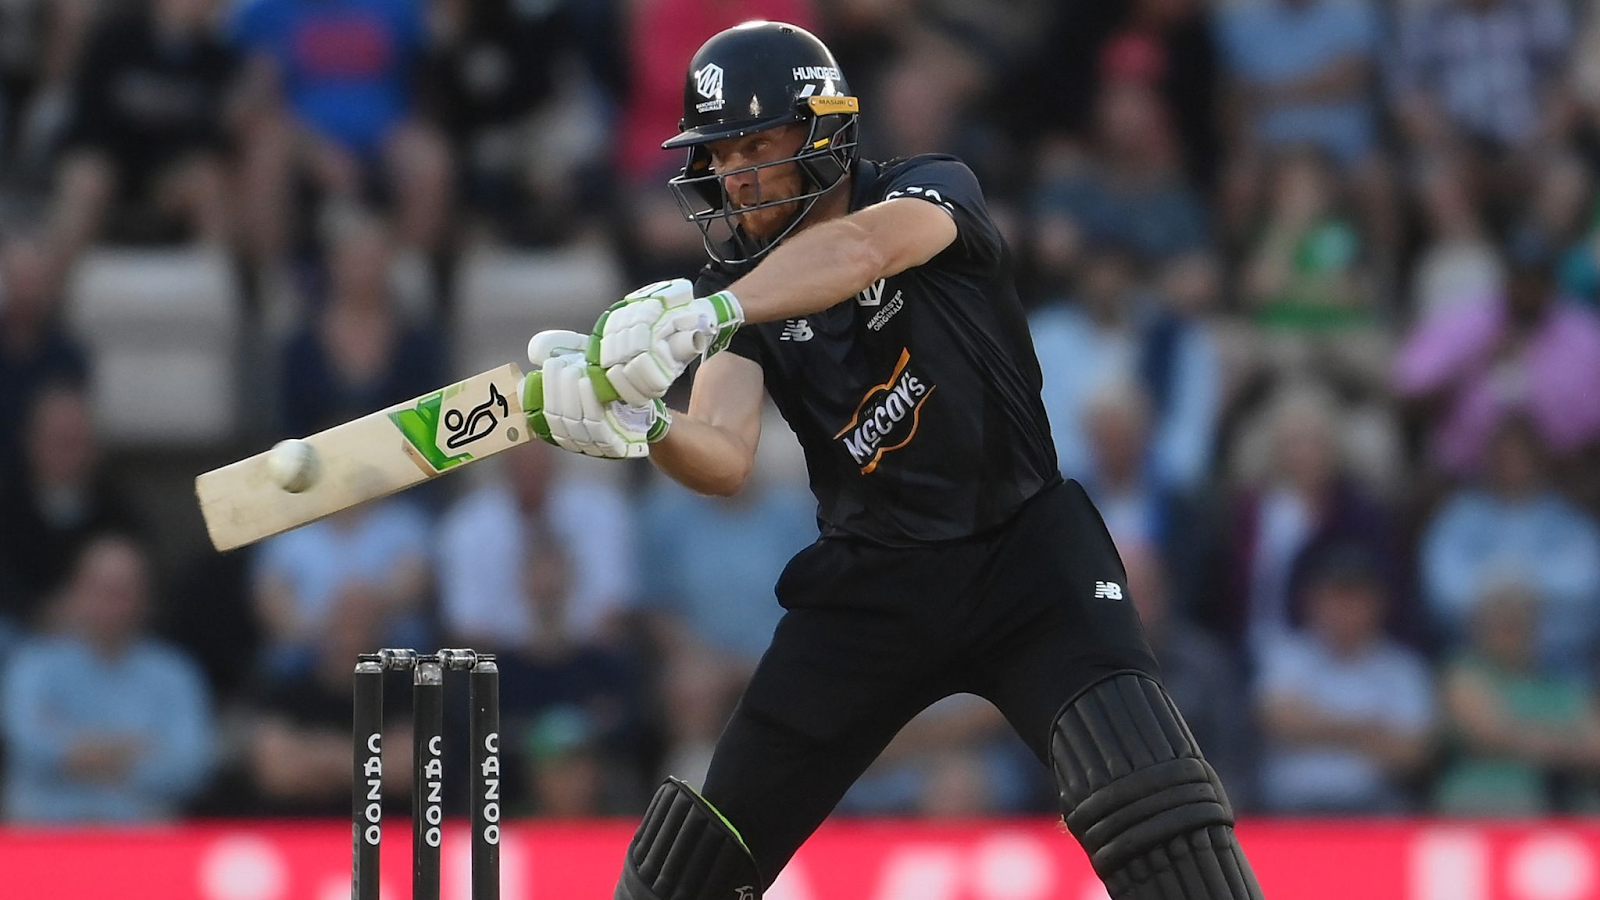 Jos Buttler and Andre Russell led Manchester Originals to victory over Southern Brave: Buttler knocked 68 off 42 deliveries to spark a huge innings for the Originals.